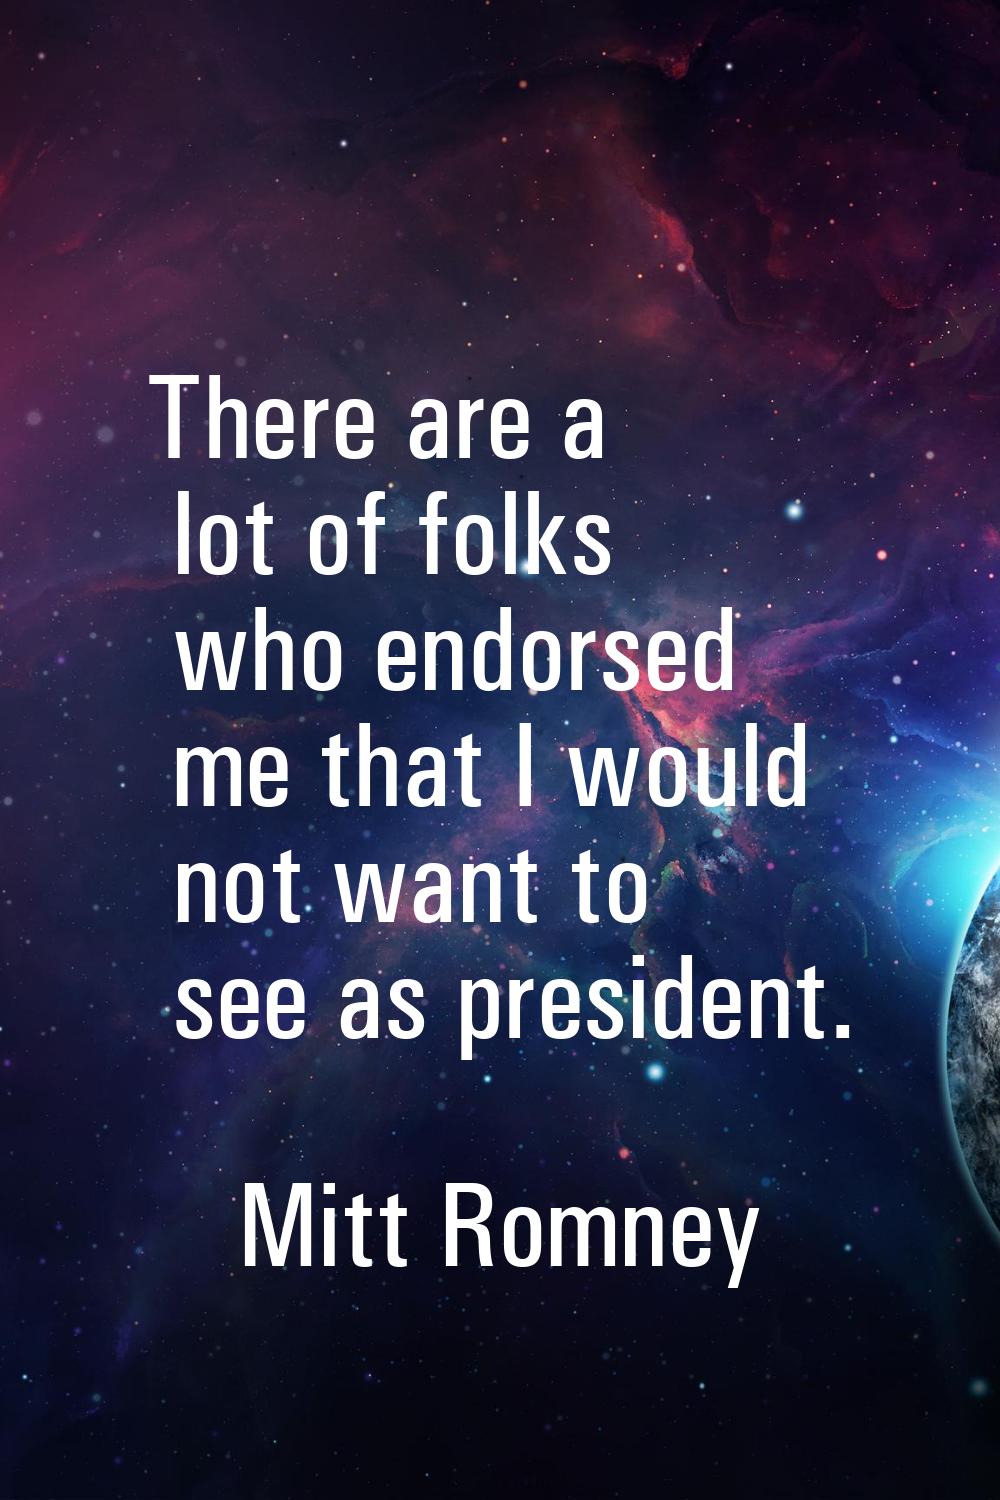 There are a lot of folks who endorsed me that I would not want to see as president.